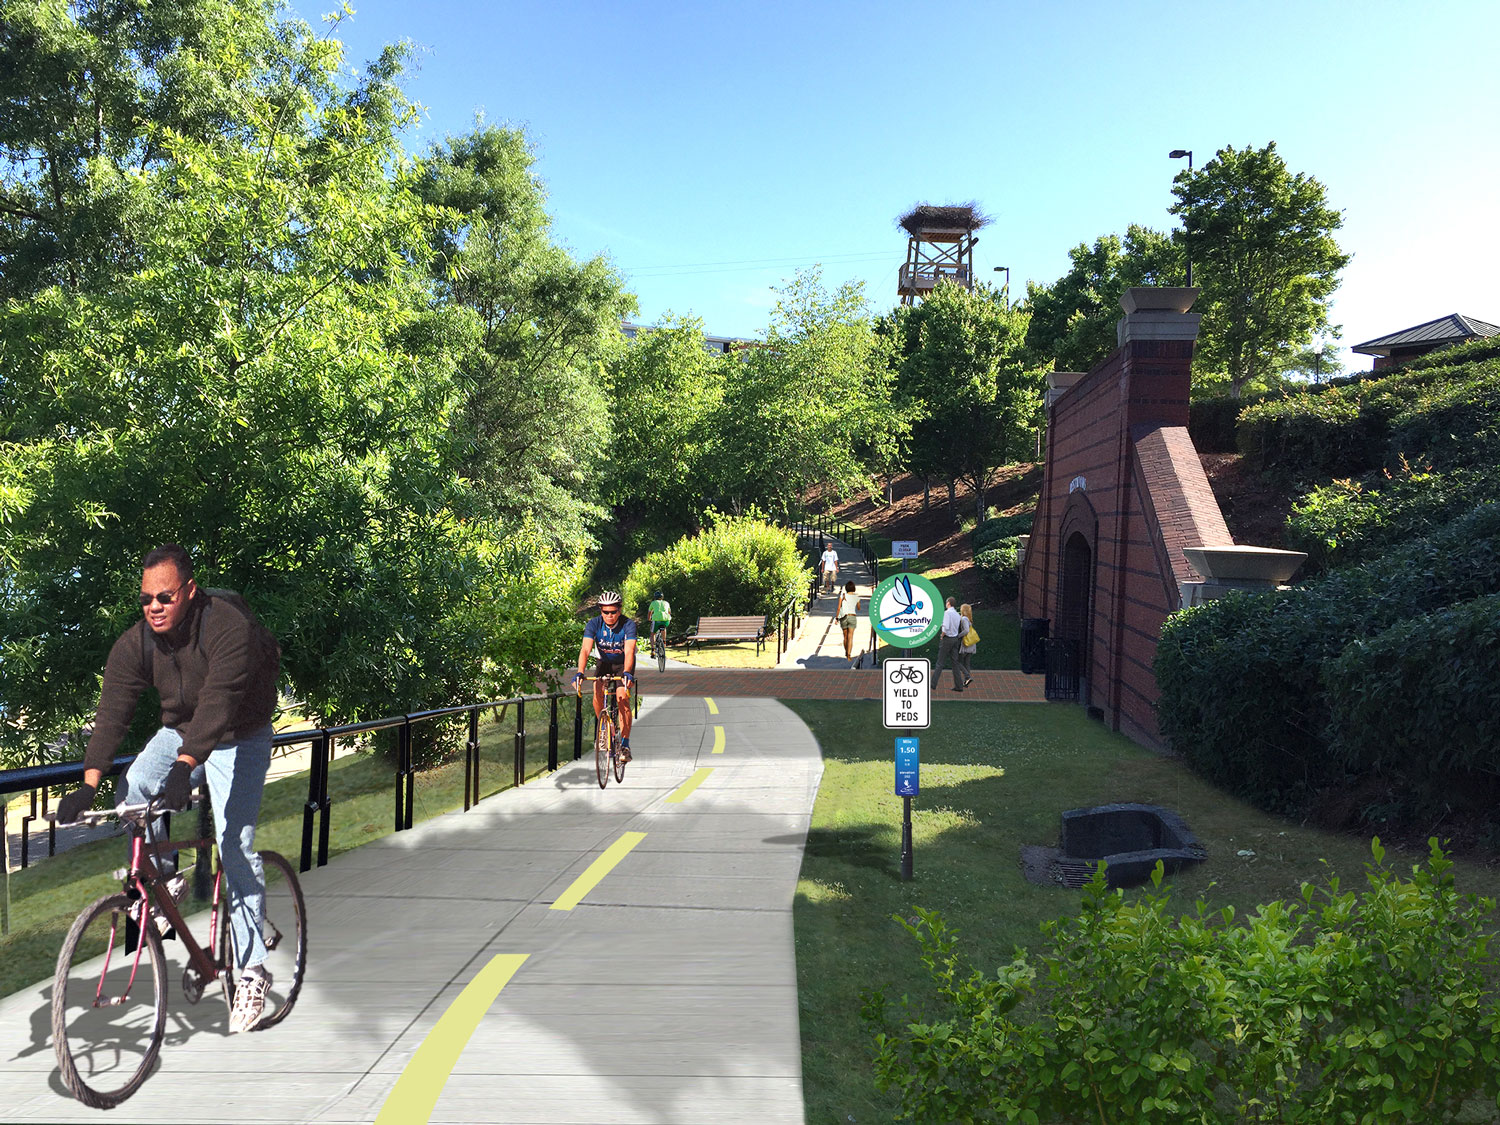  the master plan proposed to retrofit the existing switchback ramp as a multi-use connection. 